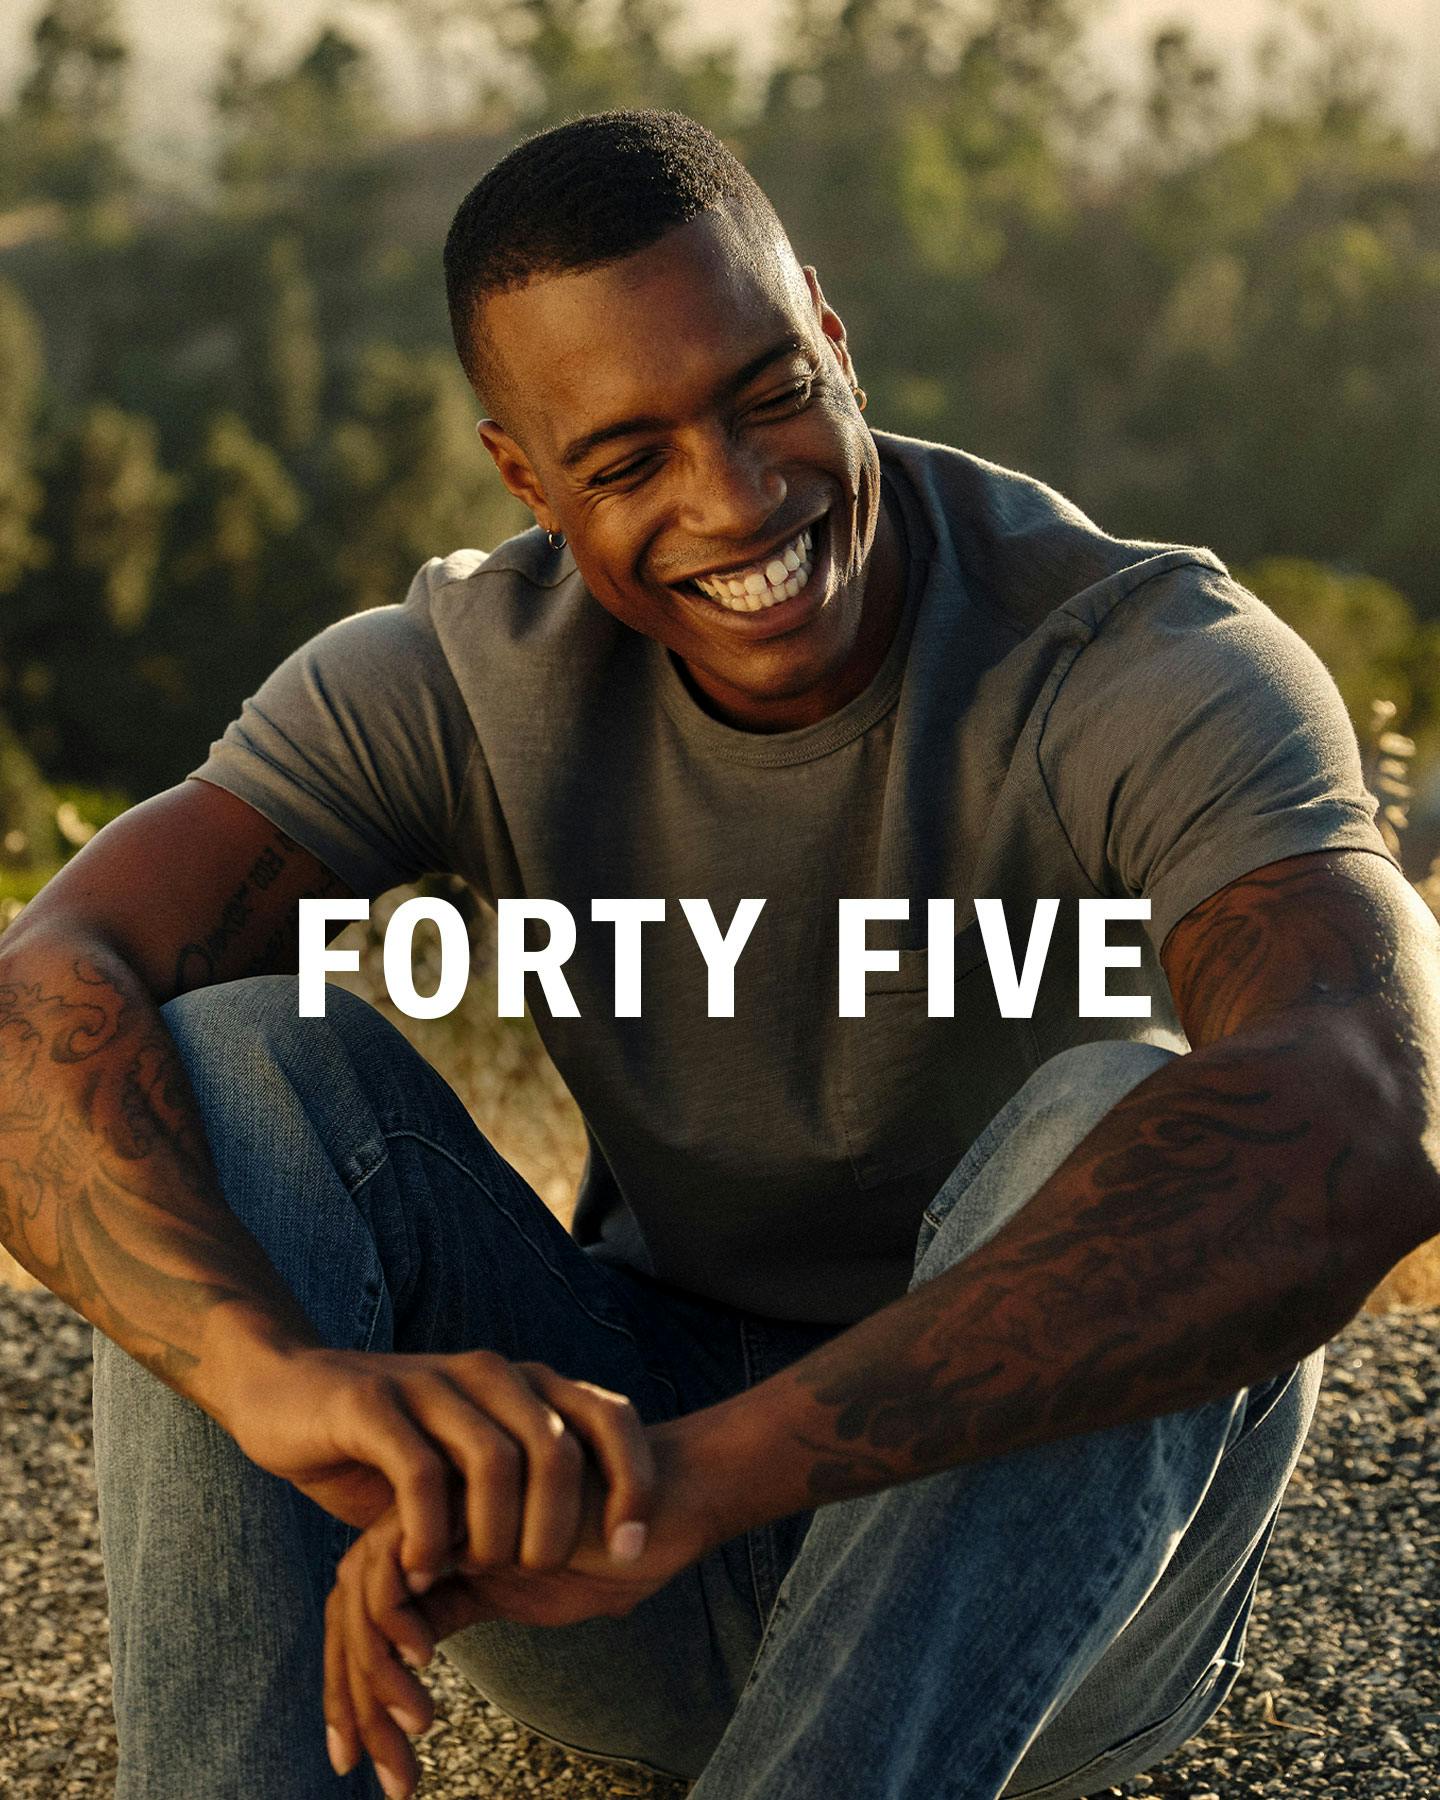 Man wearing Forty Five tee